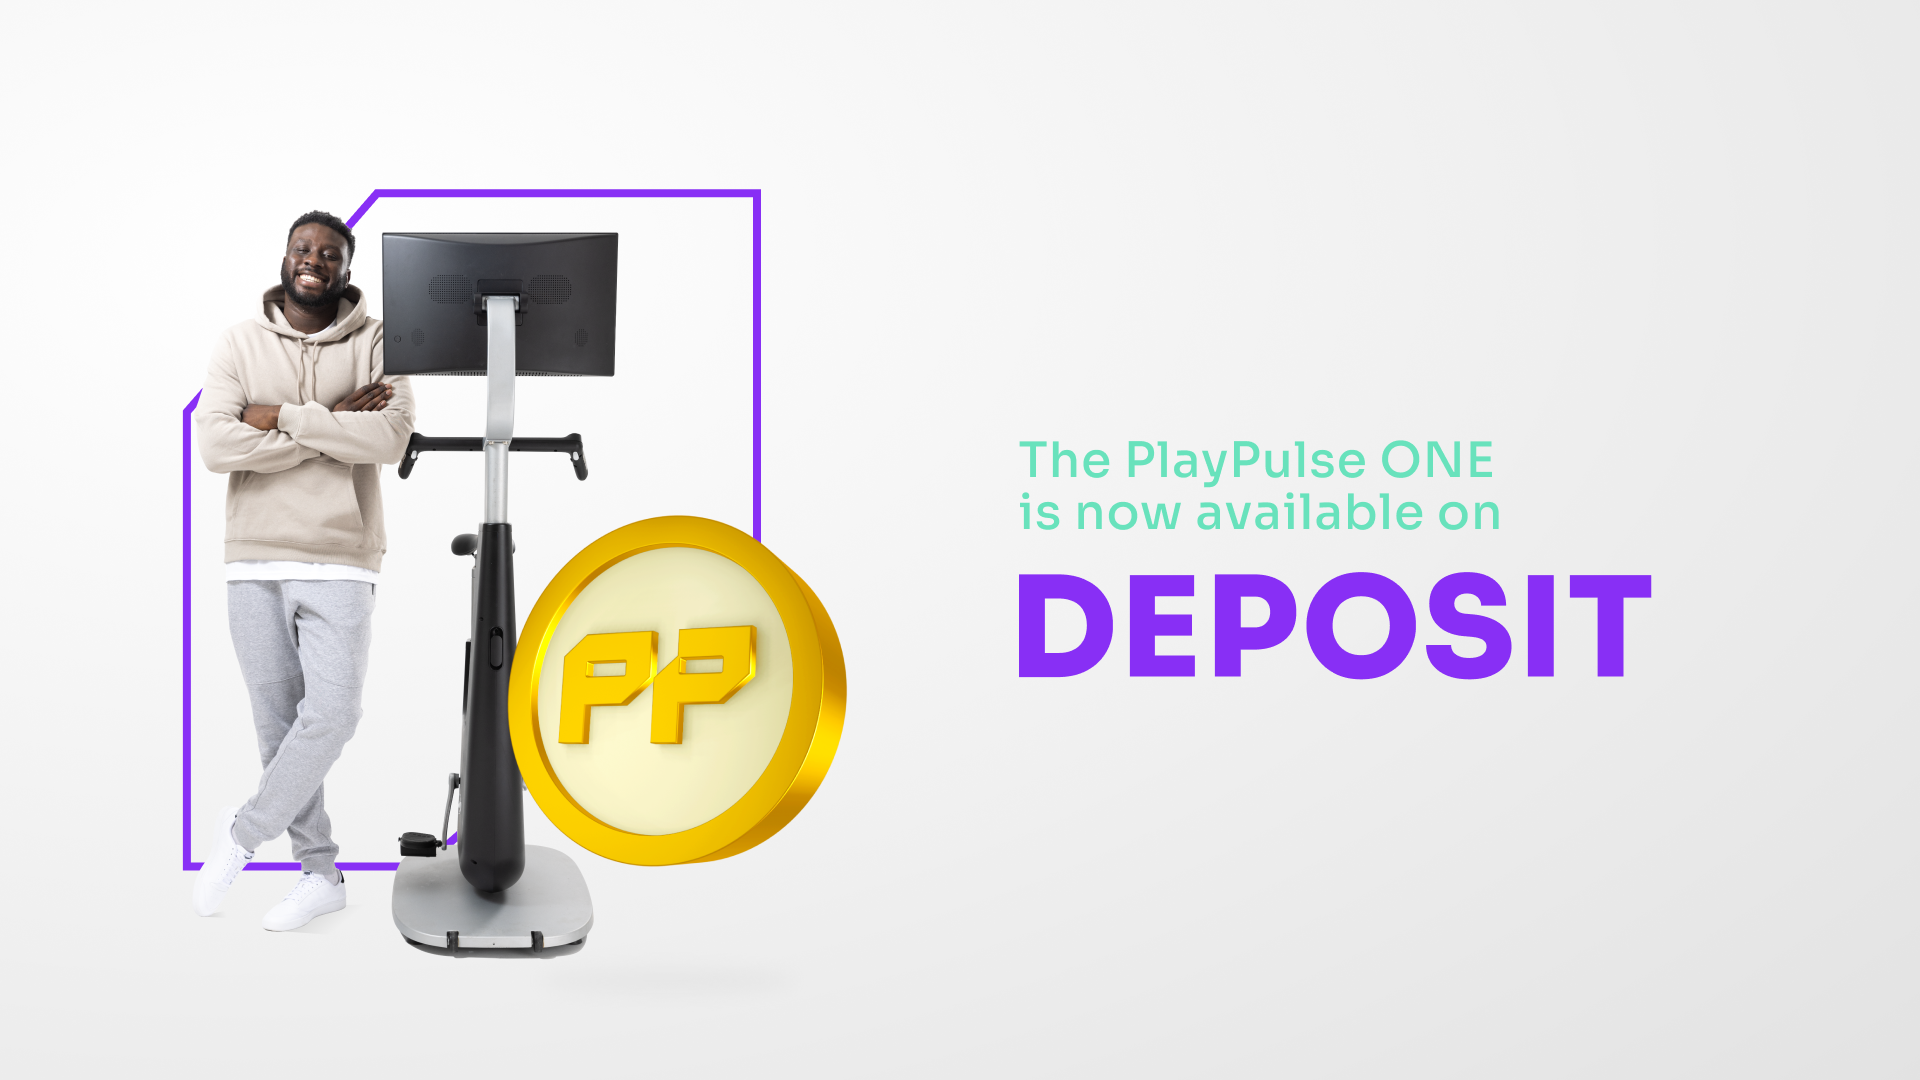 The PlayPulse ONE is now available on deposit